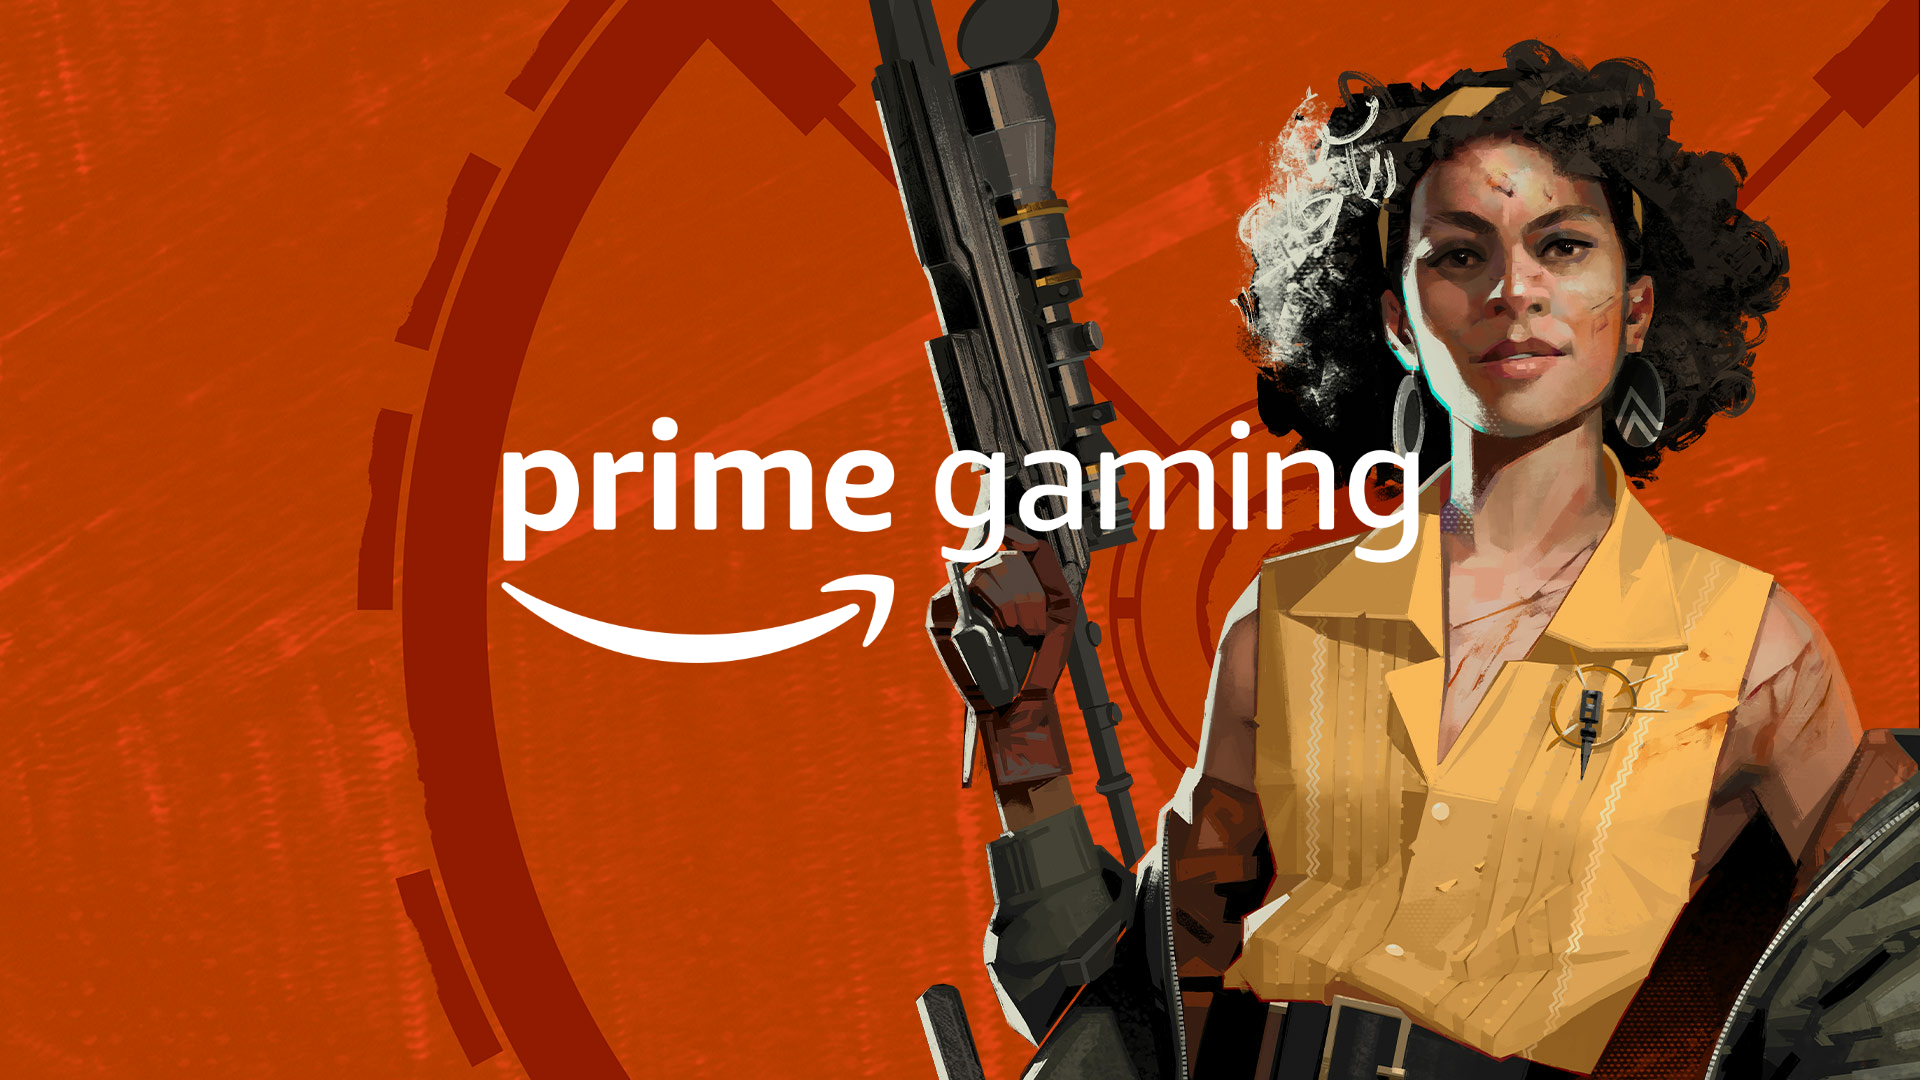 Prime Gaming October 2021 Games: Free stuff for Apex Legends, New